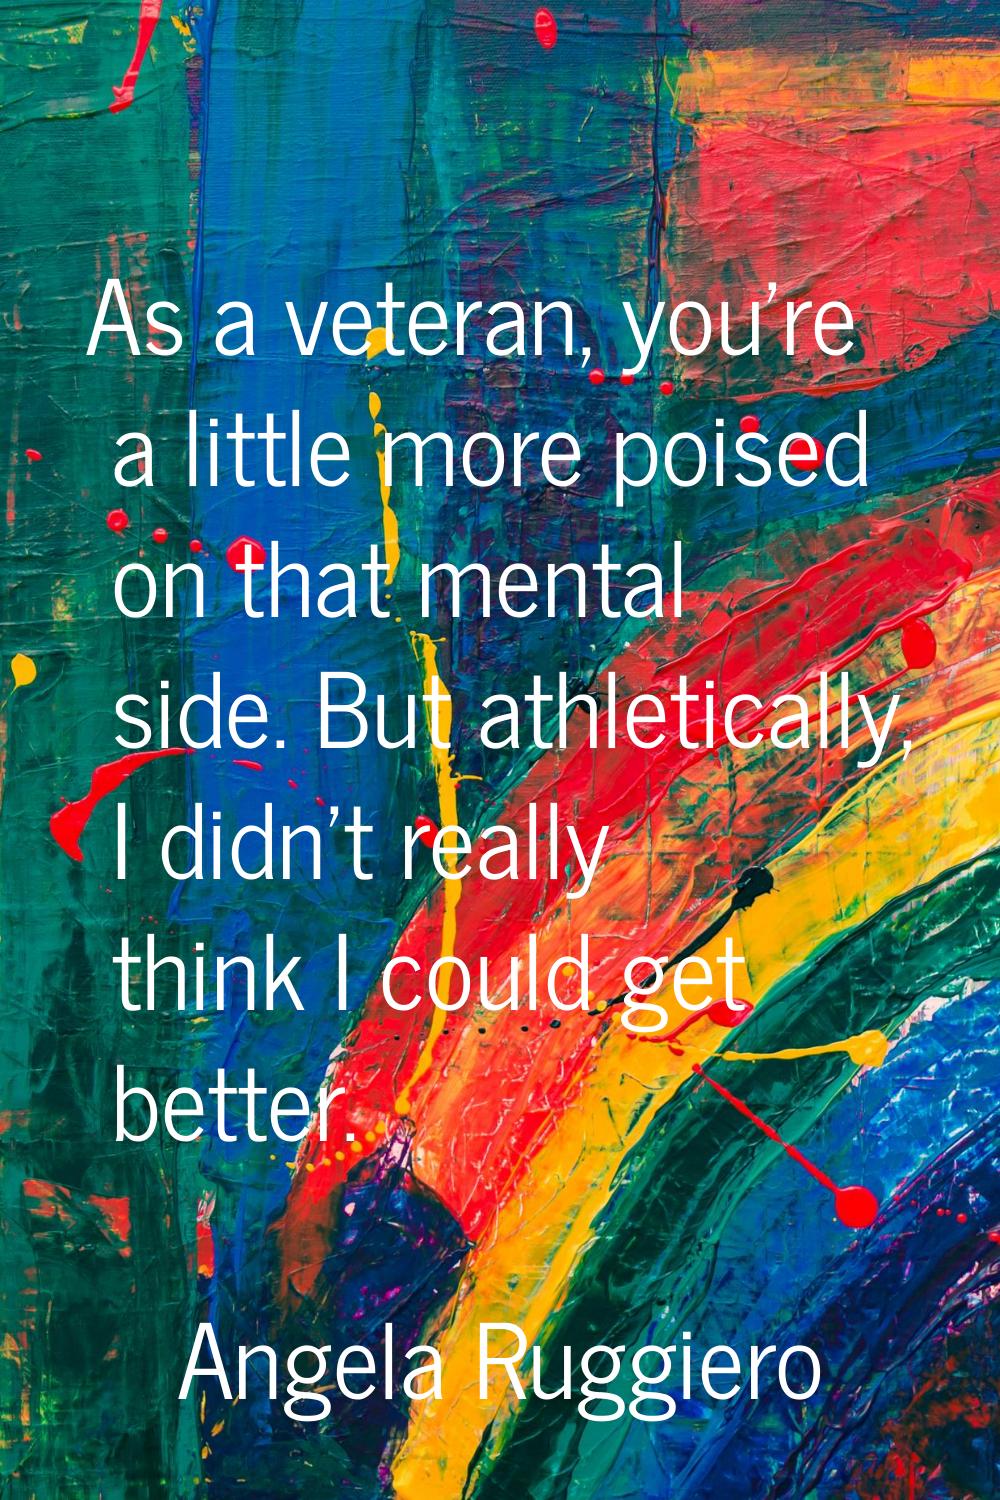 As a veteran, you're a little more poised on that mental side. But athletically, I didn't really th